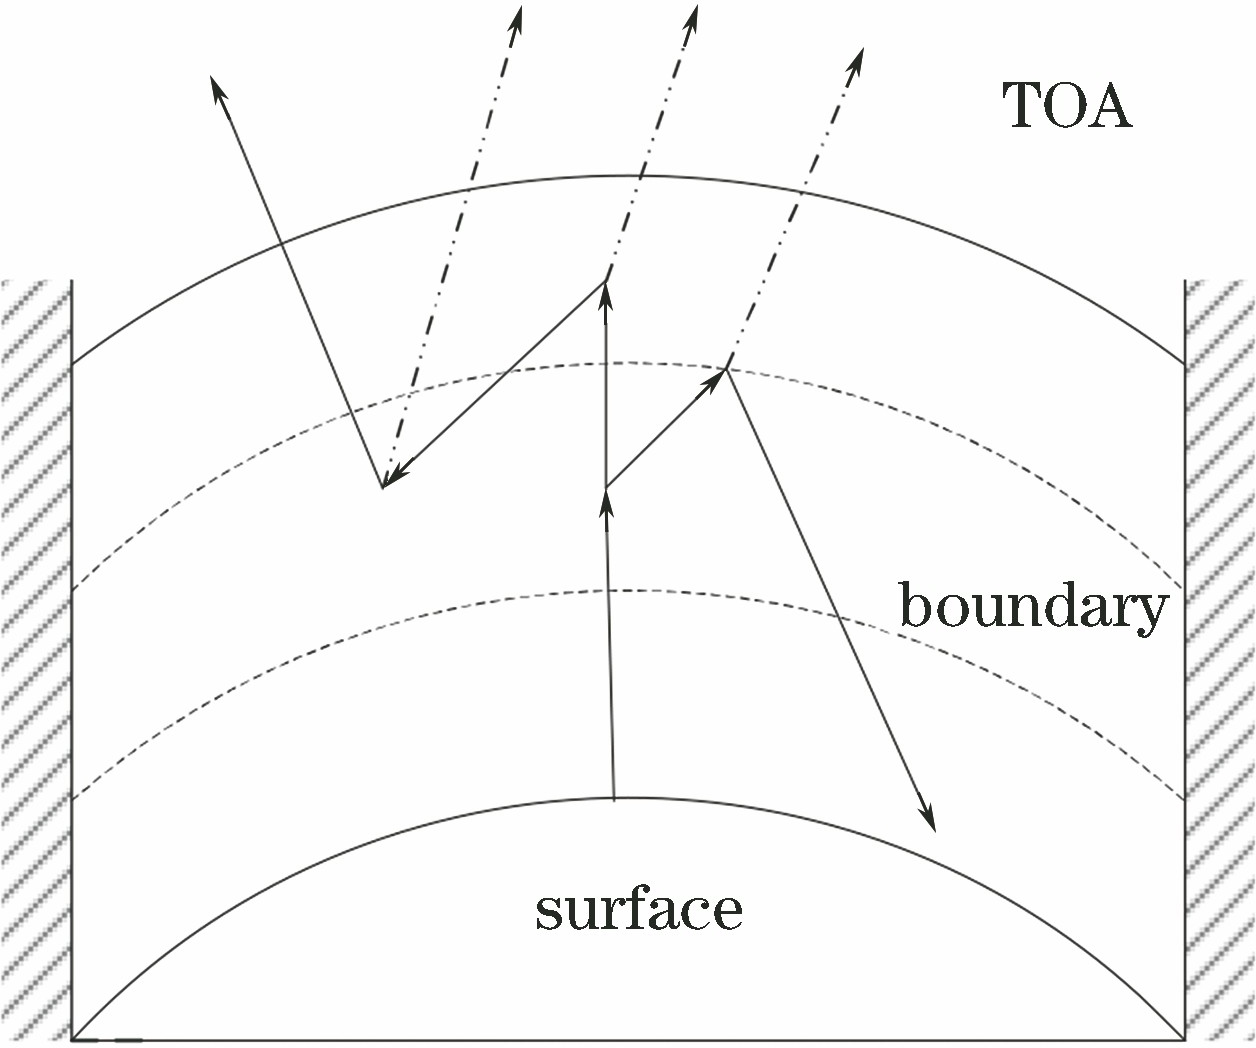 Back Monte Carlo simulation of photon transmission in aspherical atmosphere with absorbing boundary conditions